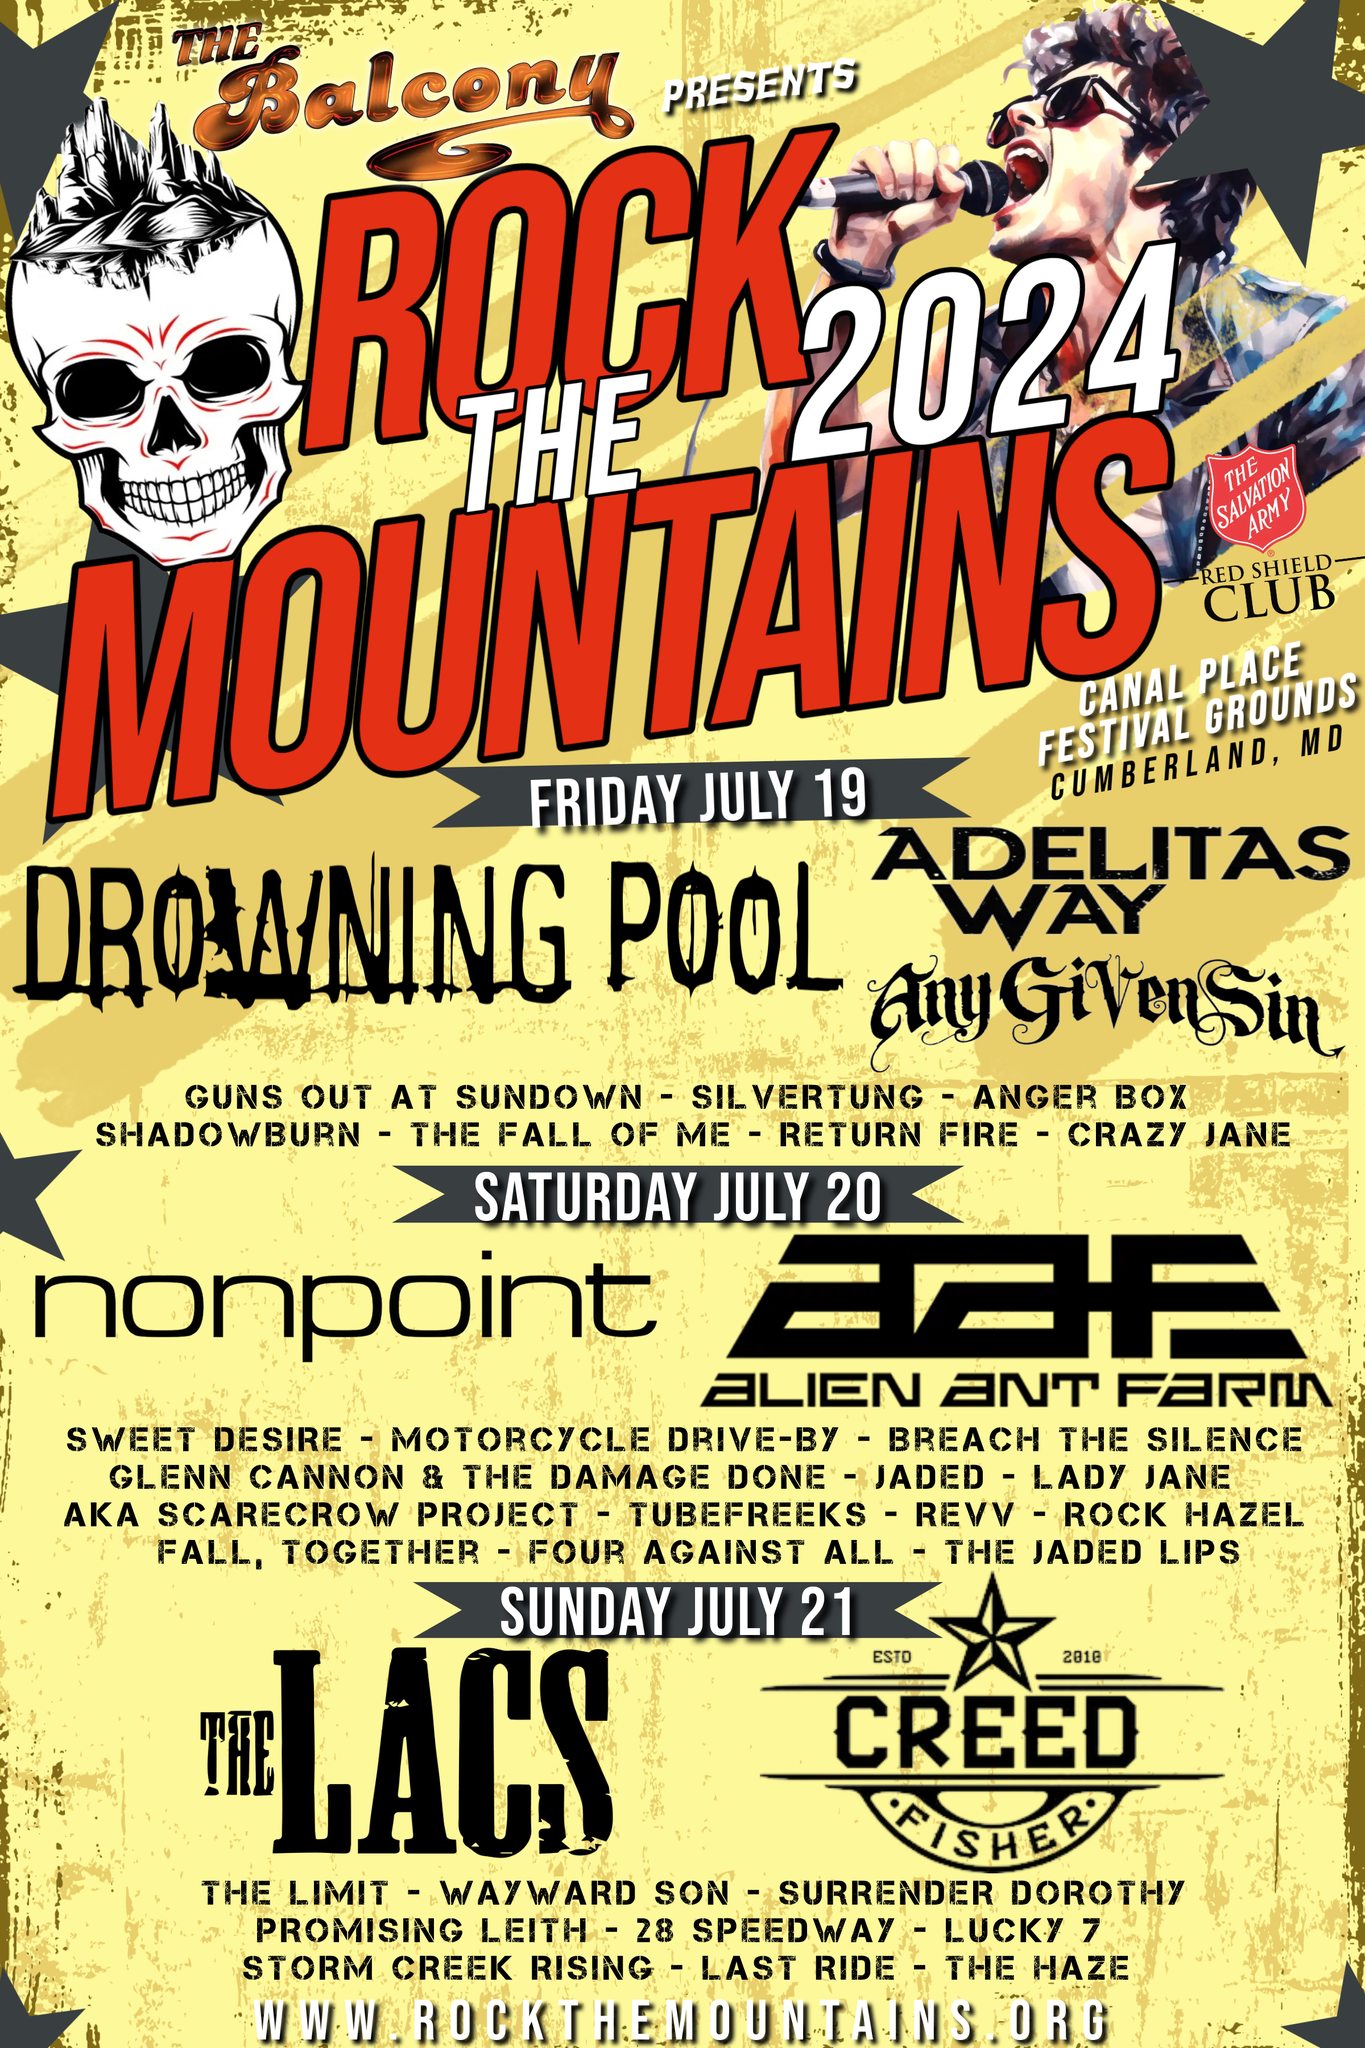 Rock the Mountains 2024 flyer